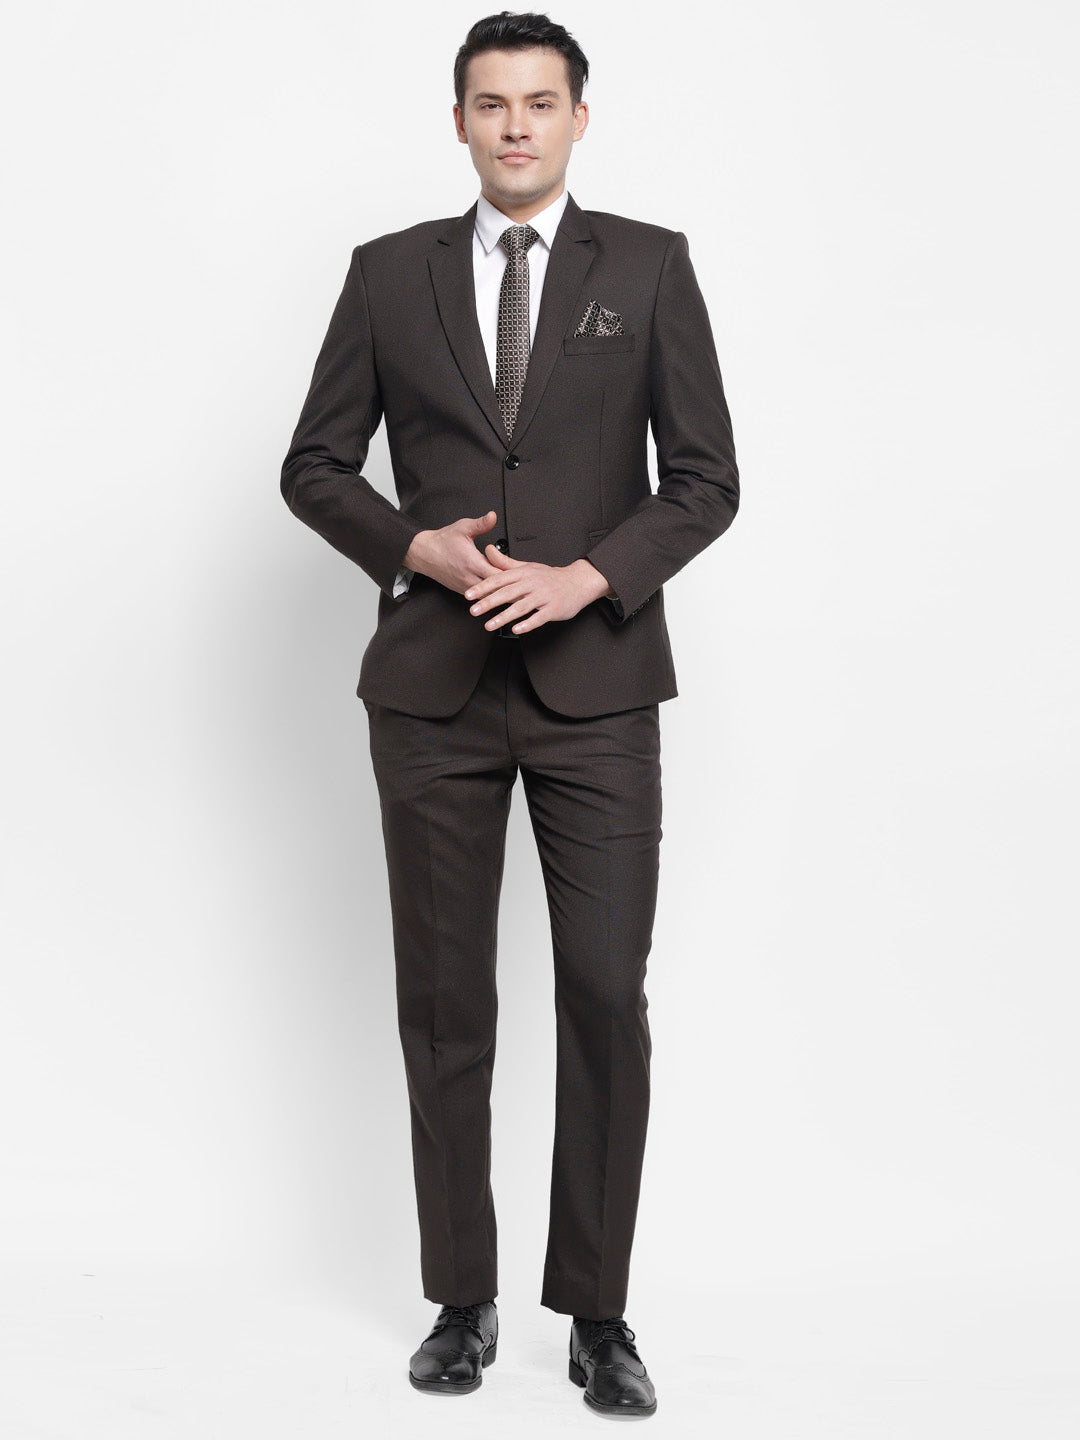 Buy FORTY-2 Men's Slim Fit Formal Black Two Piece Suit (36) at Amazon.in